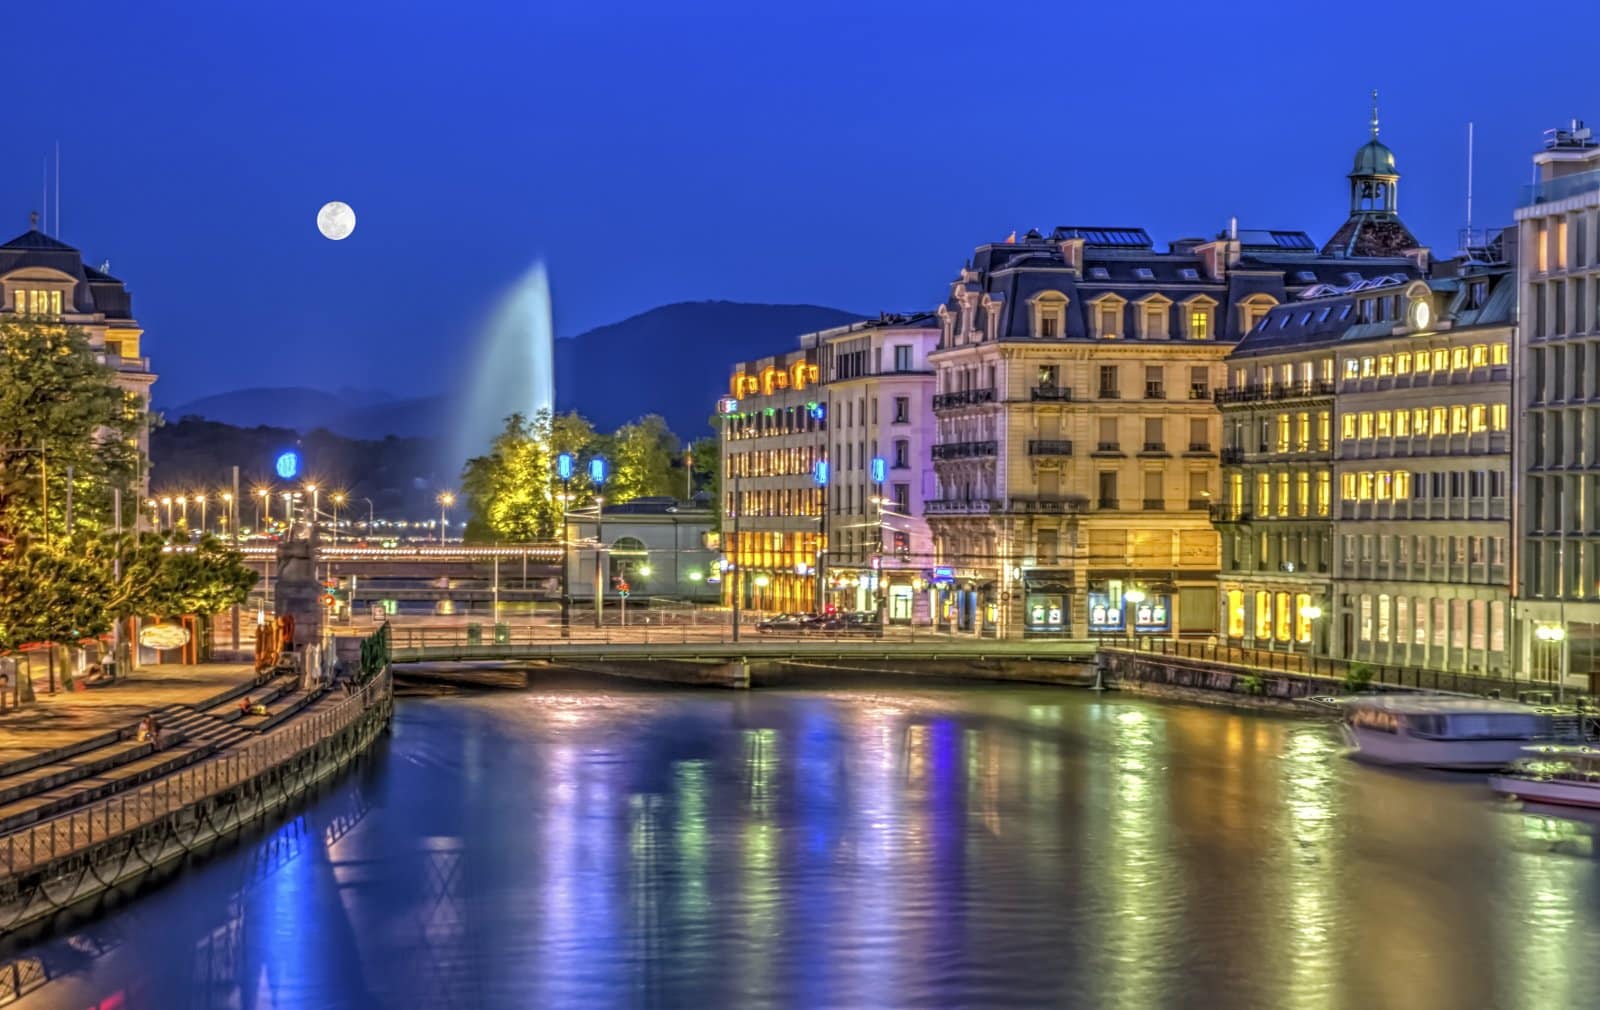 Image Credit: Shutterstock / Elenarts <p>Embrace Geneva’s international flair, with weekends spent exploring world-class museums, attending diplomatic events, and dining at Michelin-starred restaurants overlooking Lake Geneva. Discover the city’s natural beauty, with walks along the lakefront promenade and day trips to nearby vineyards in the Swiss countryside.</p>